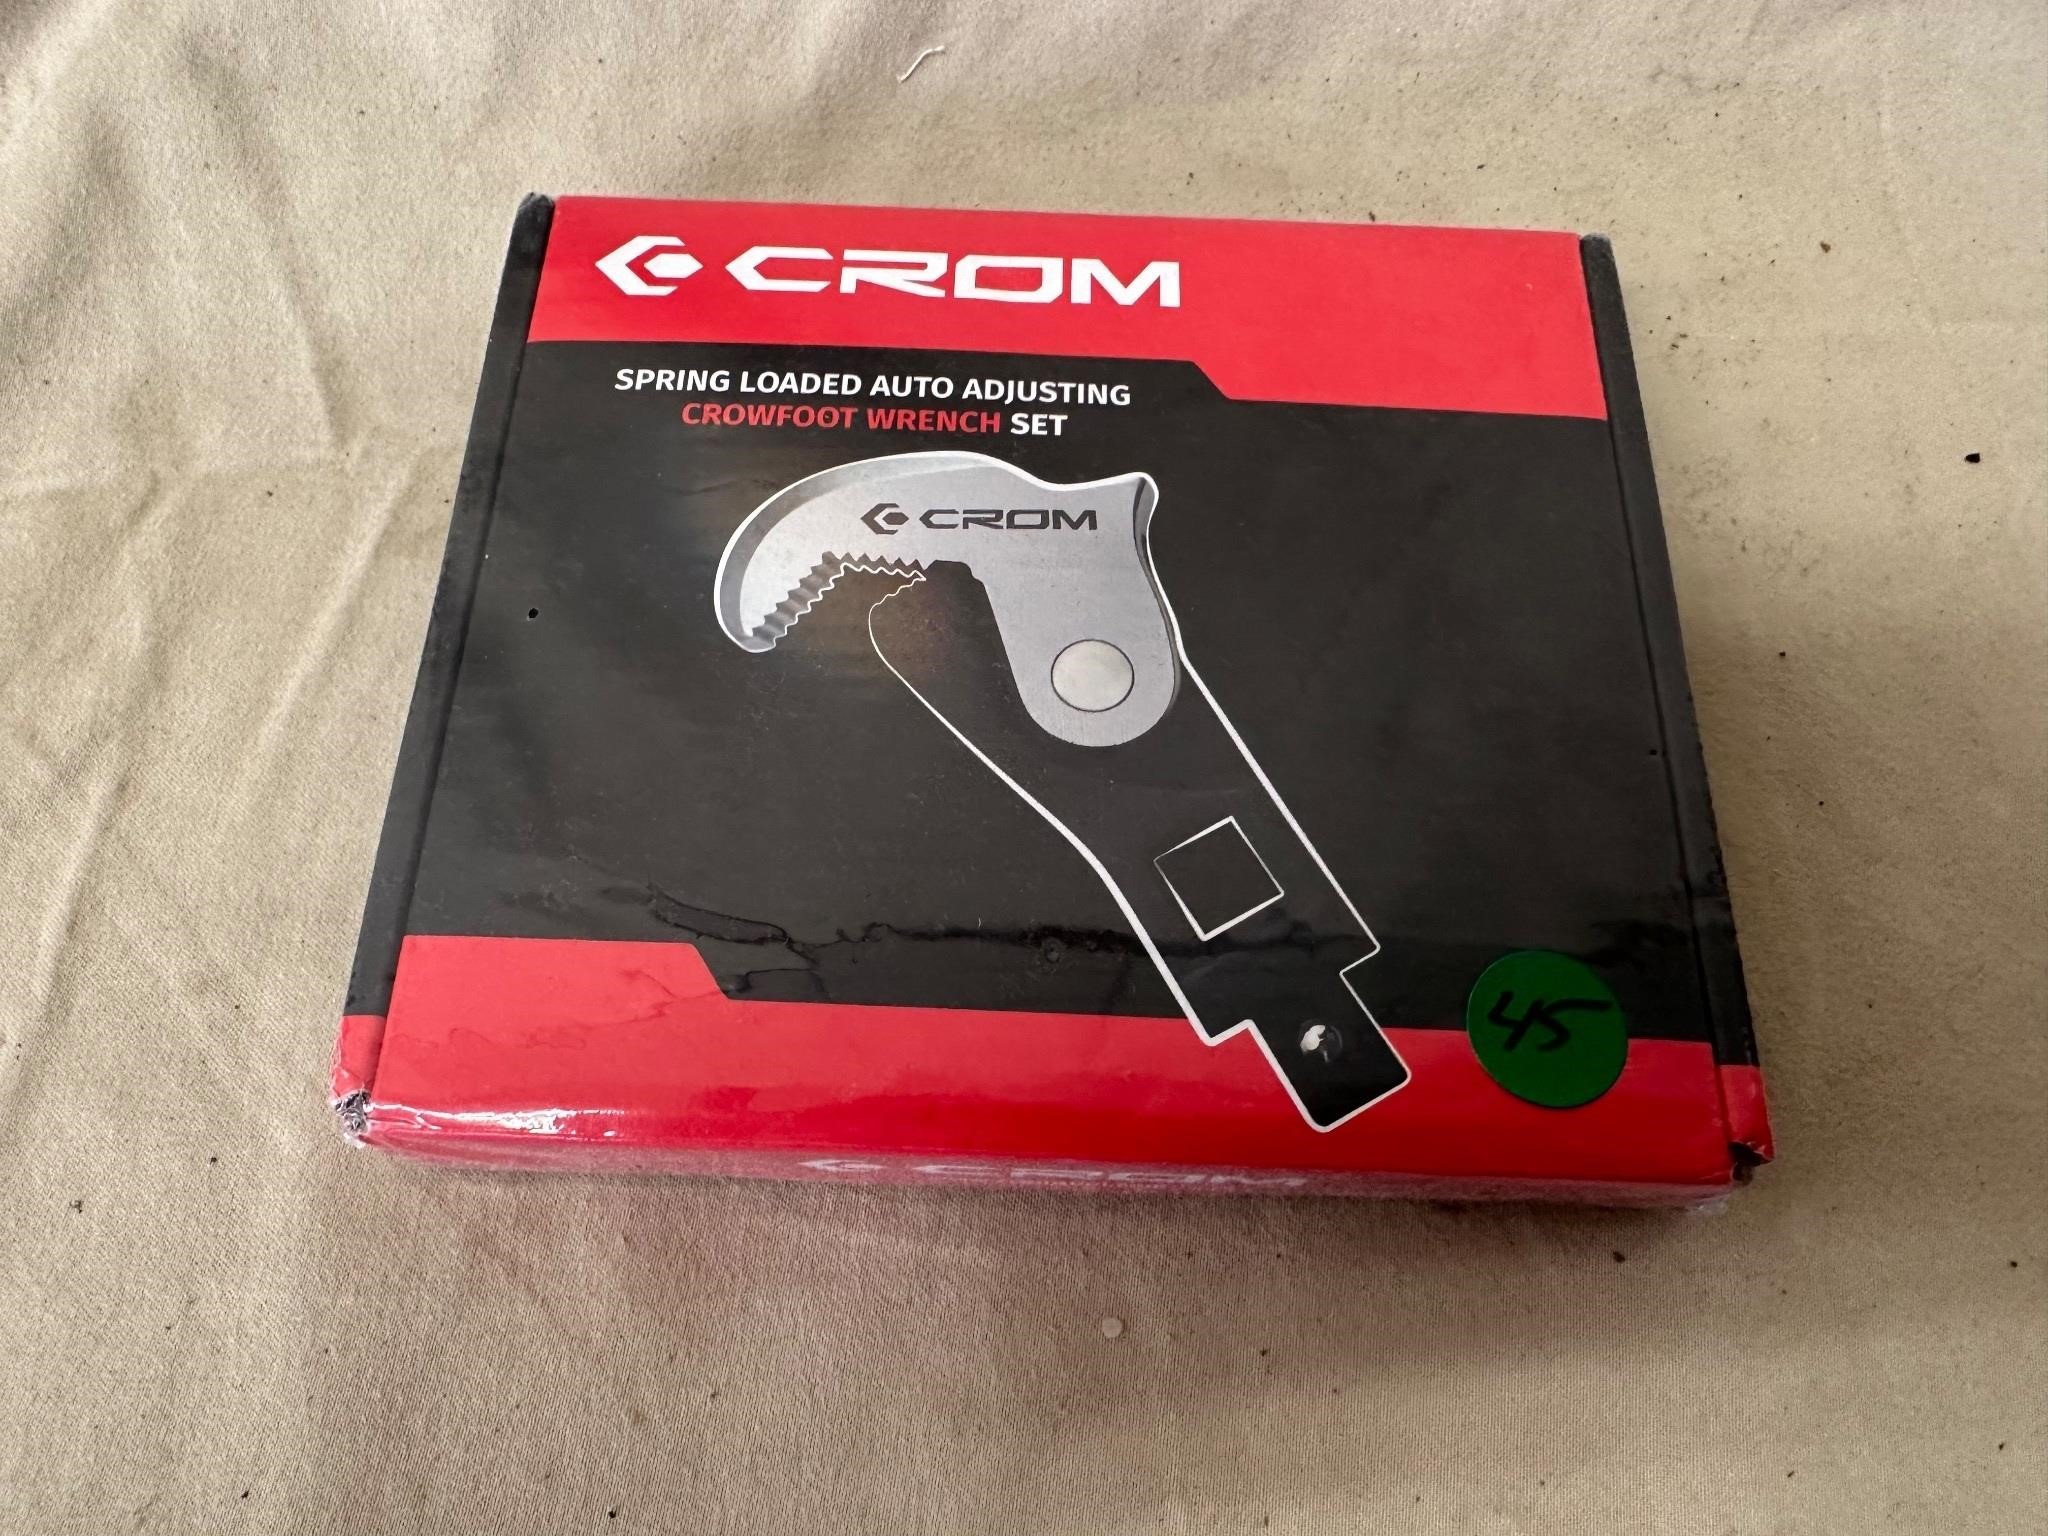 Crowfoot wrench set